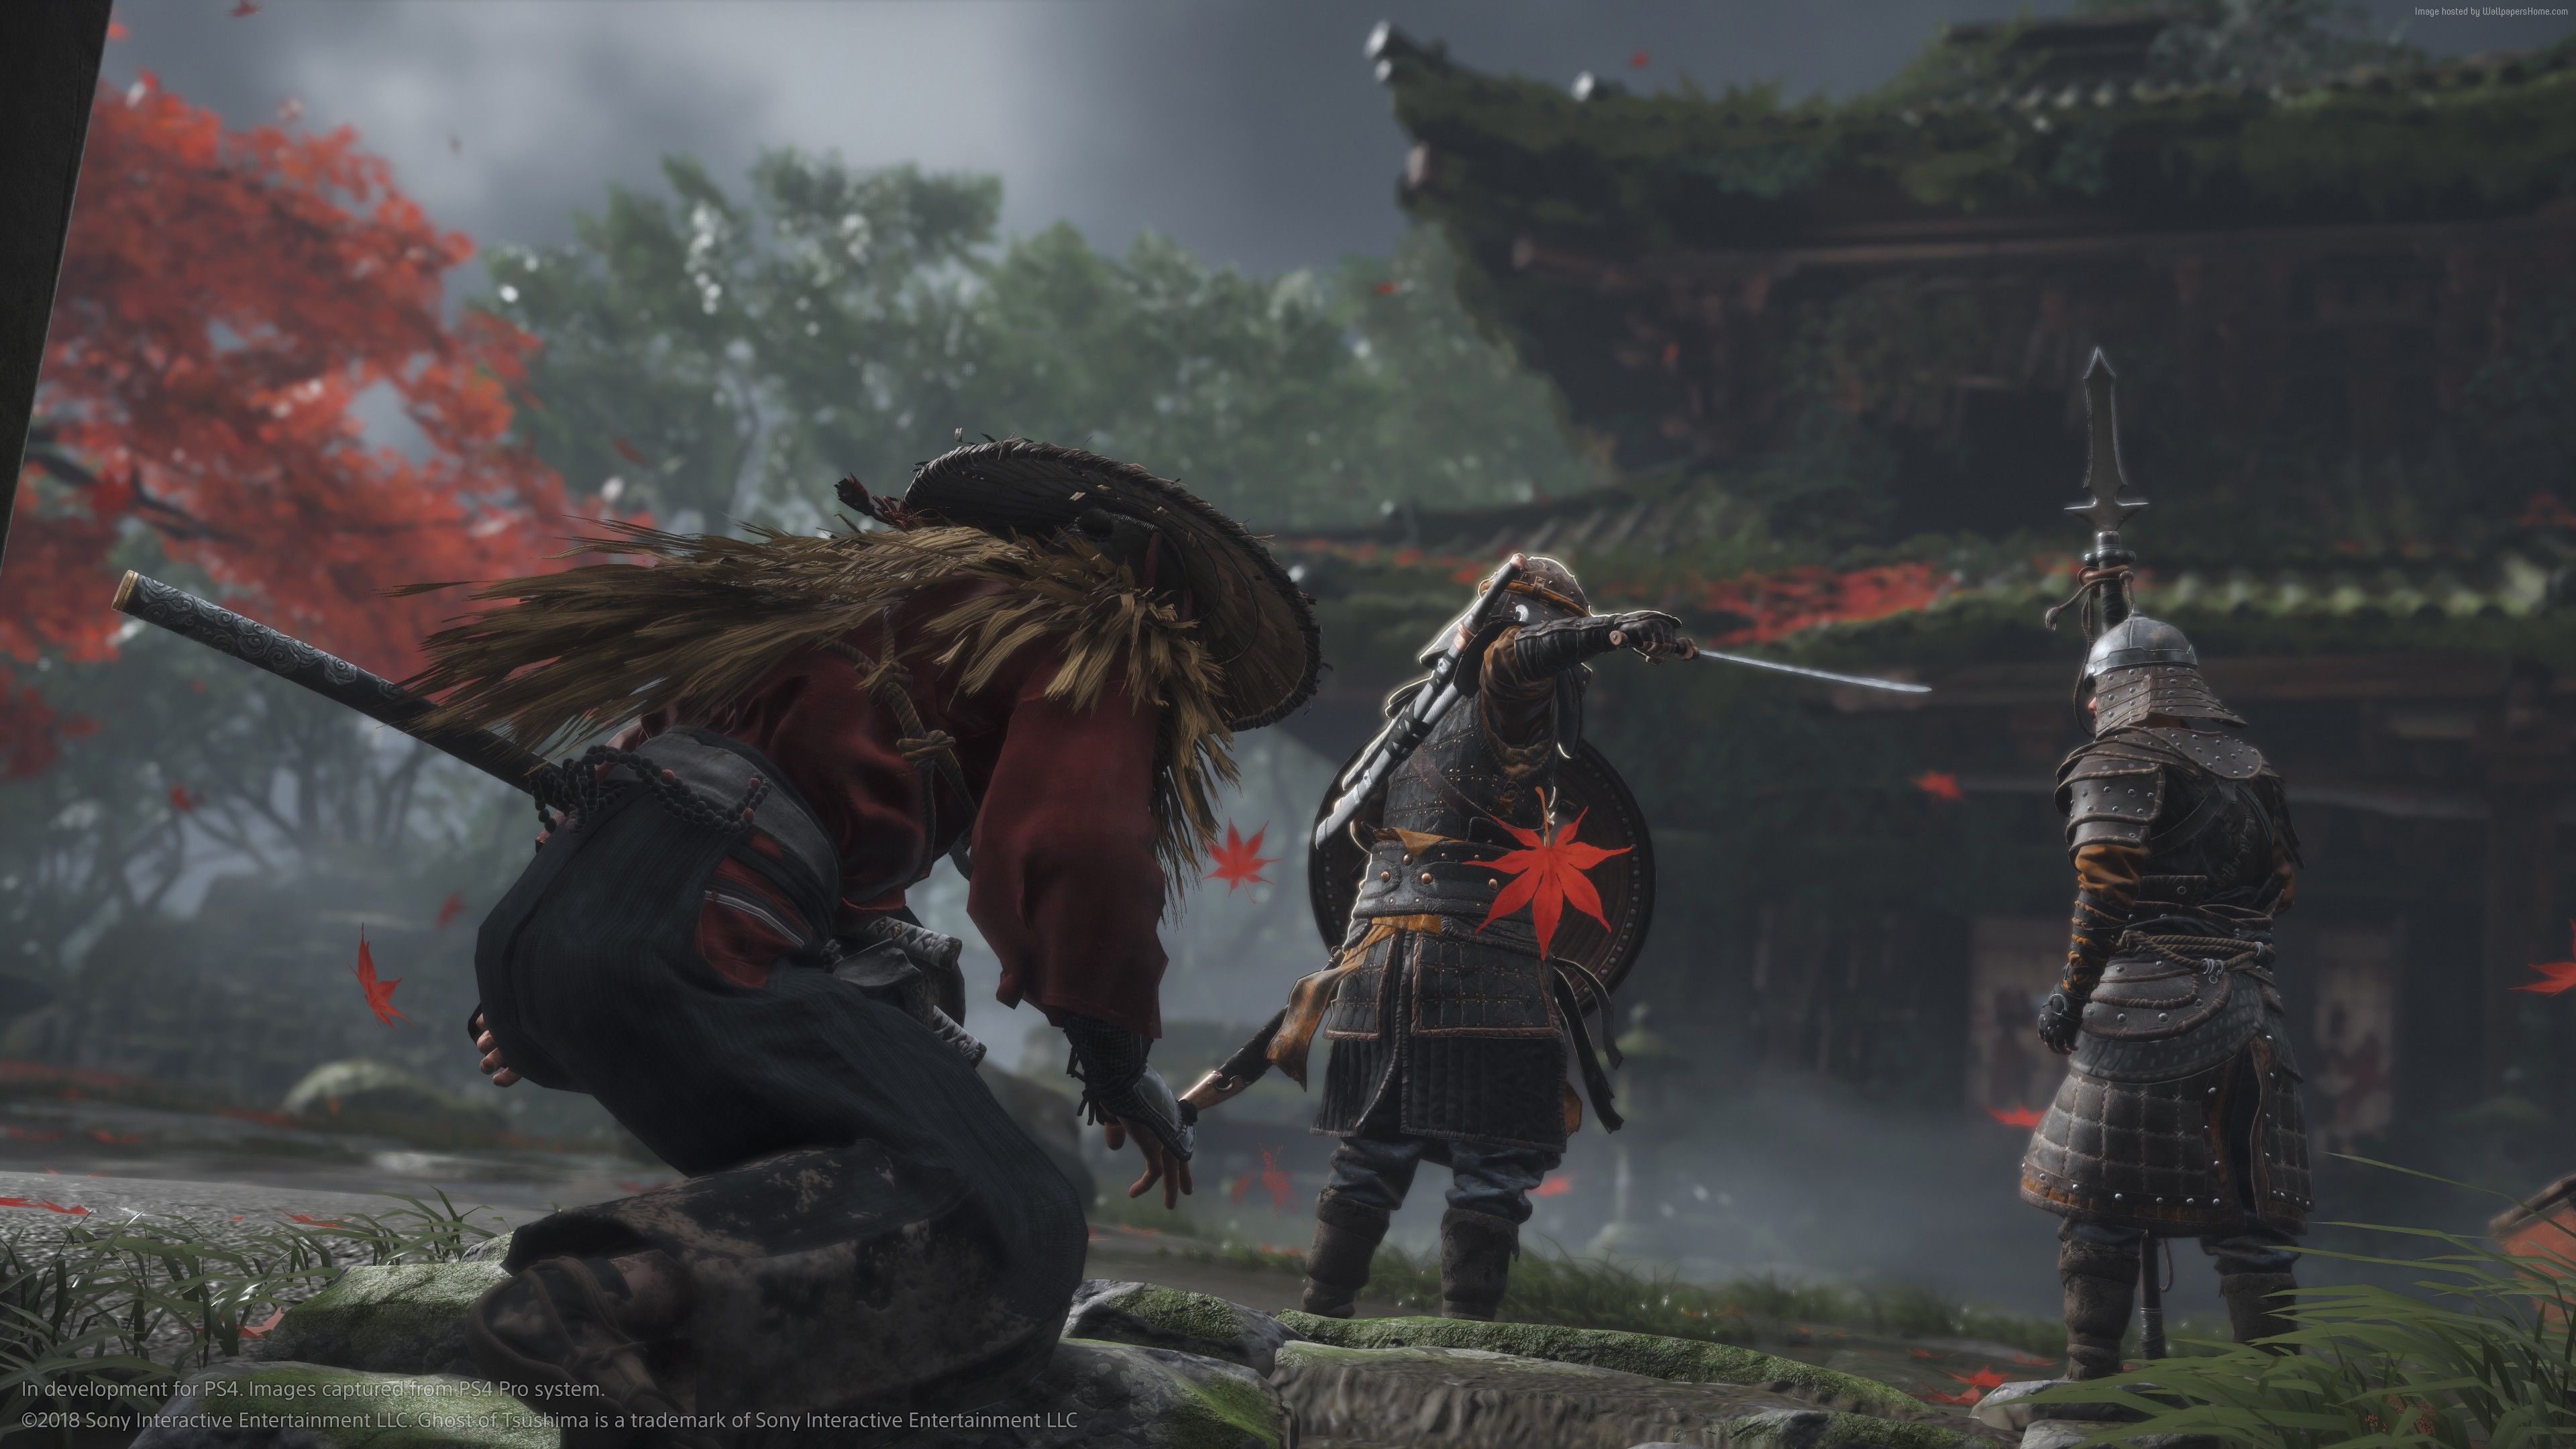 Ghost Of Tsushima PC Wallpapers - Wallpaper Cave